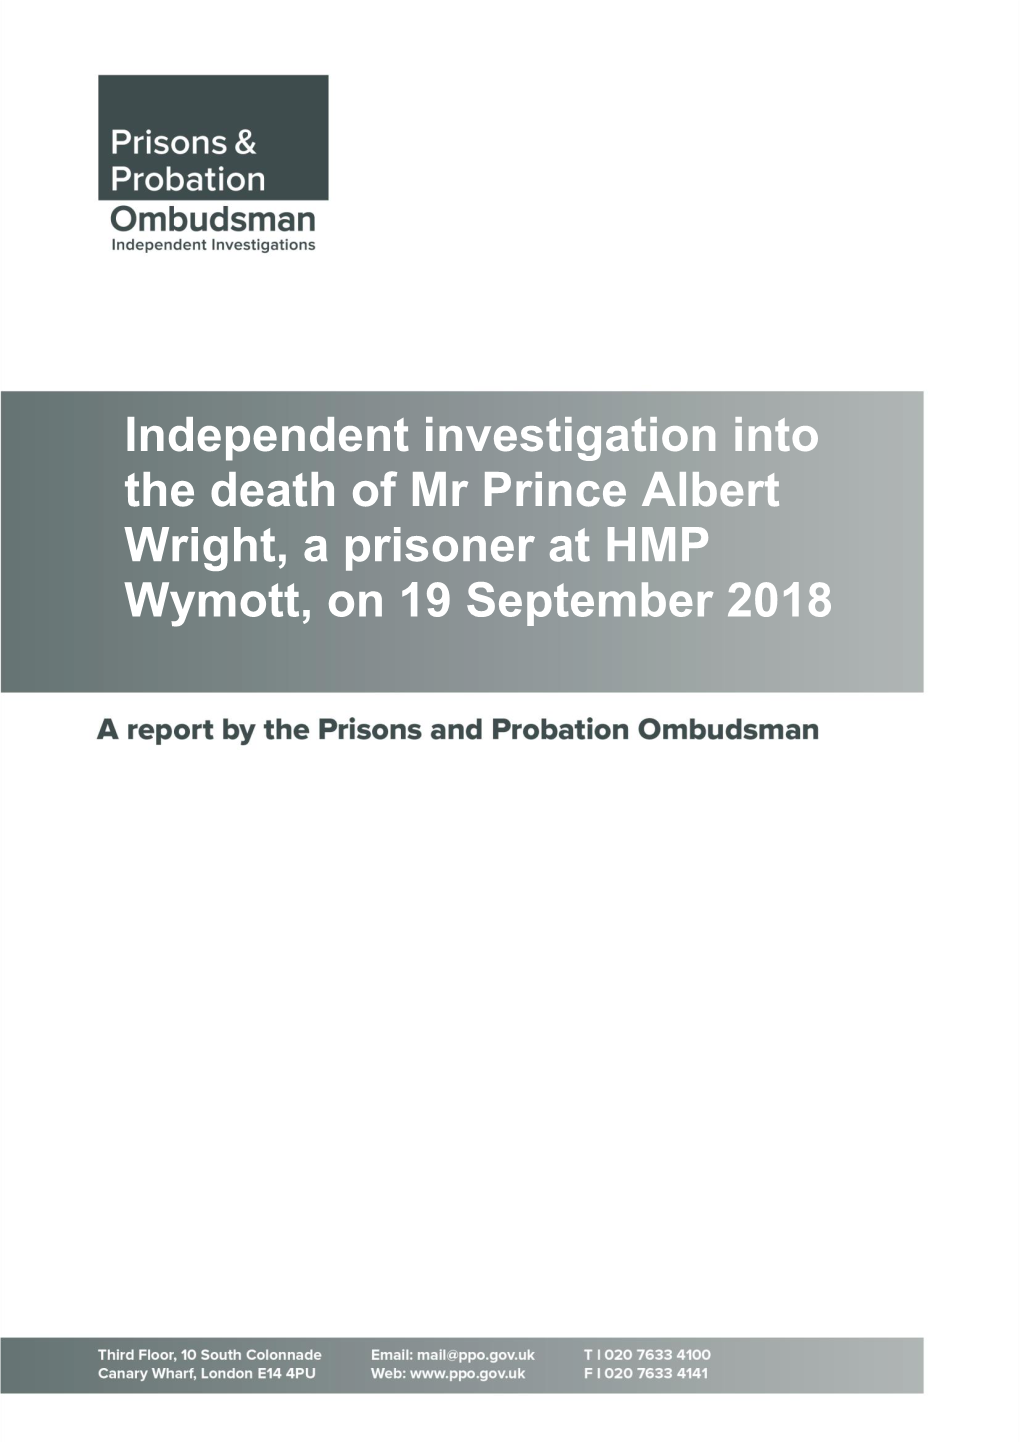 Independent Investigation Into the Death of Mr Prince Albert Wright, a Prisoner at HMP Wymott, on 19 September 2018